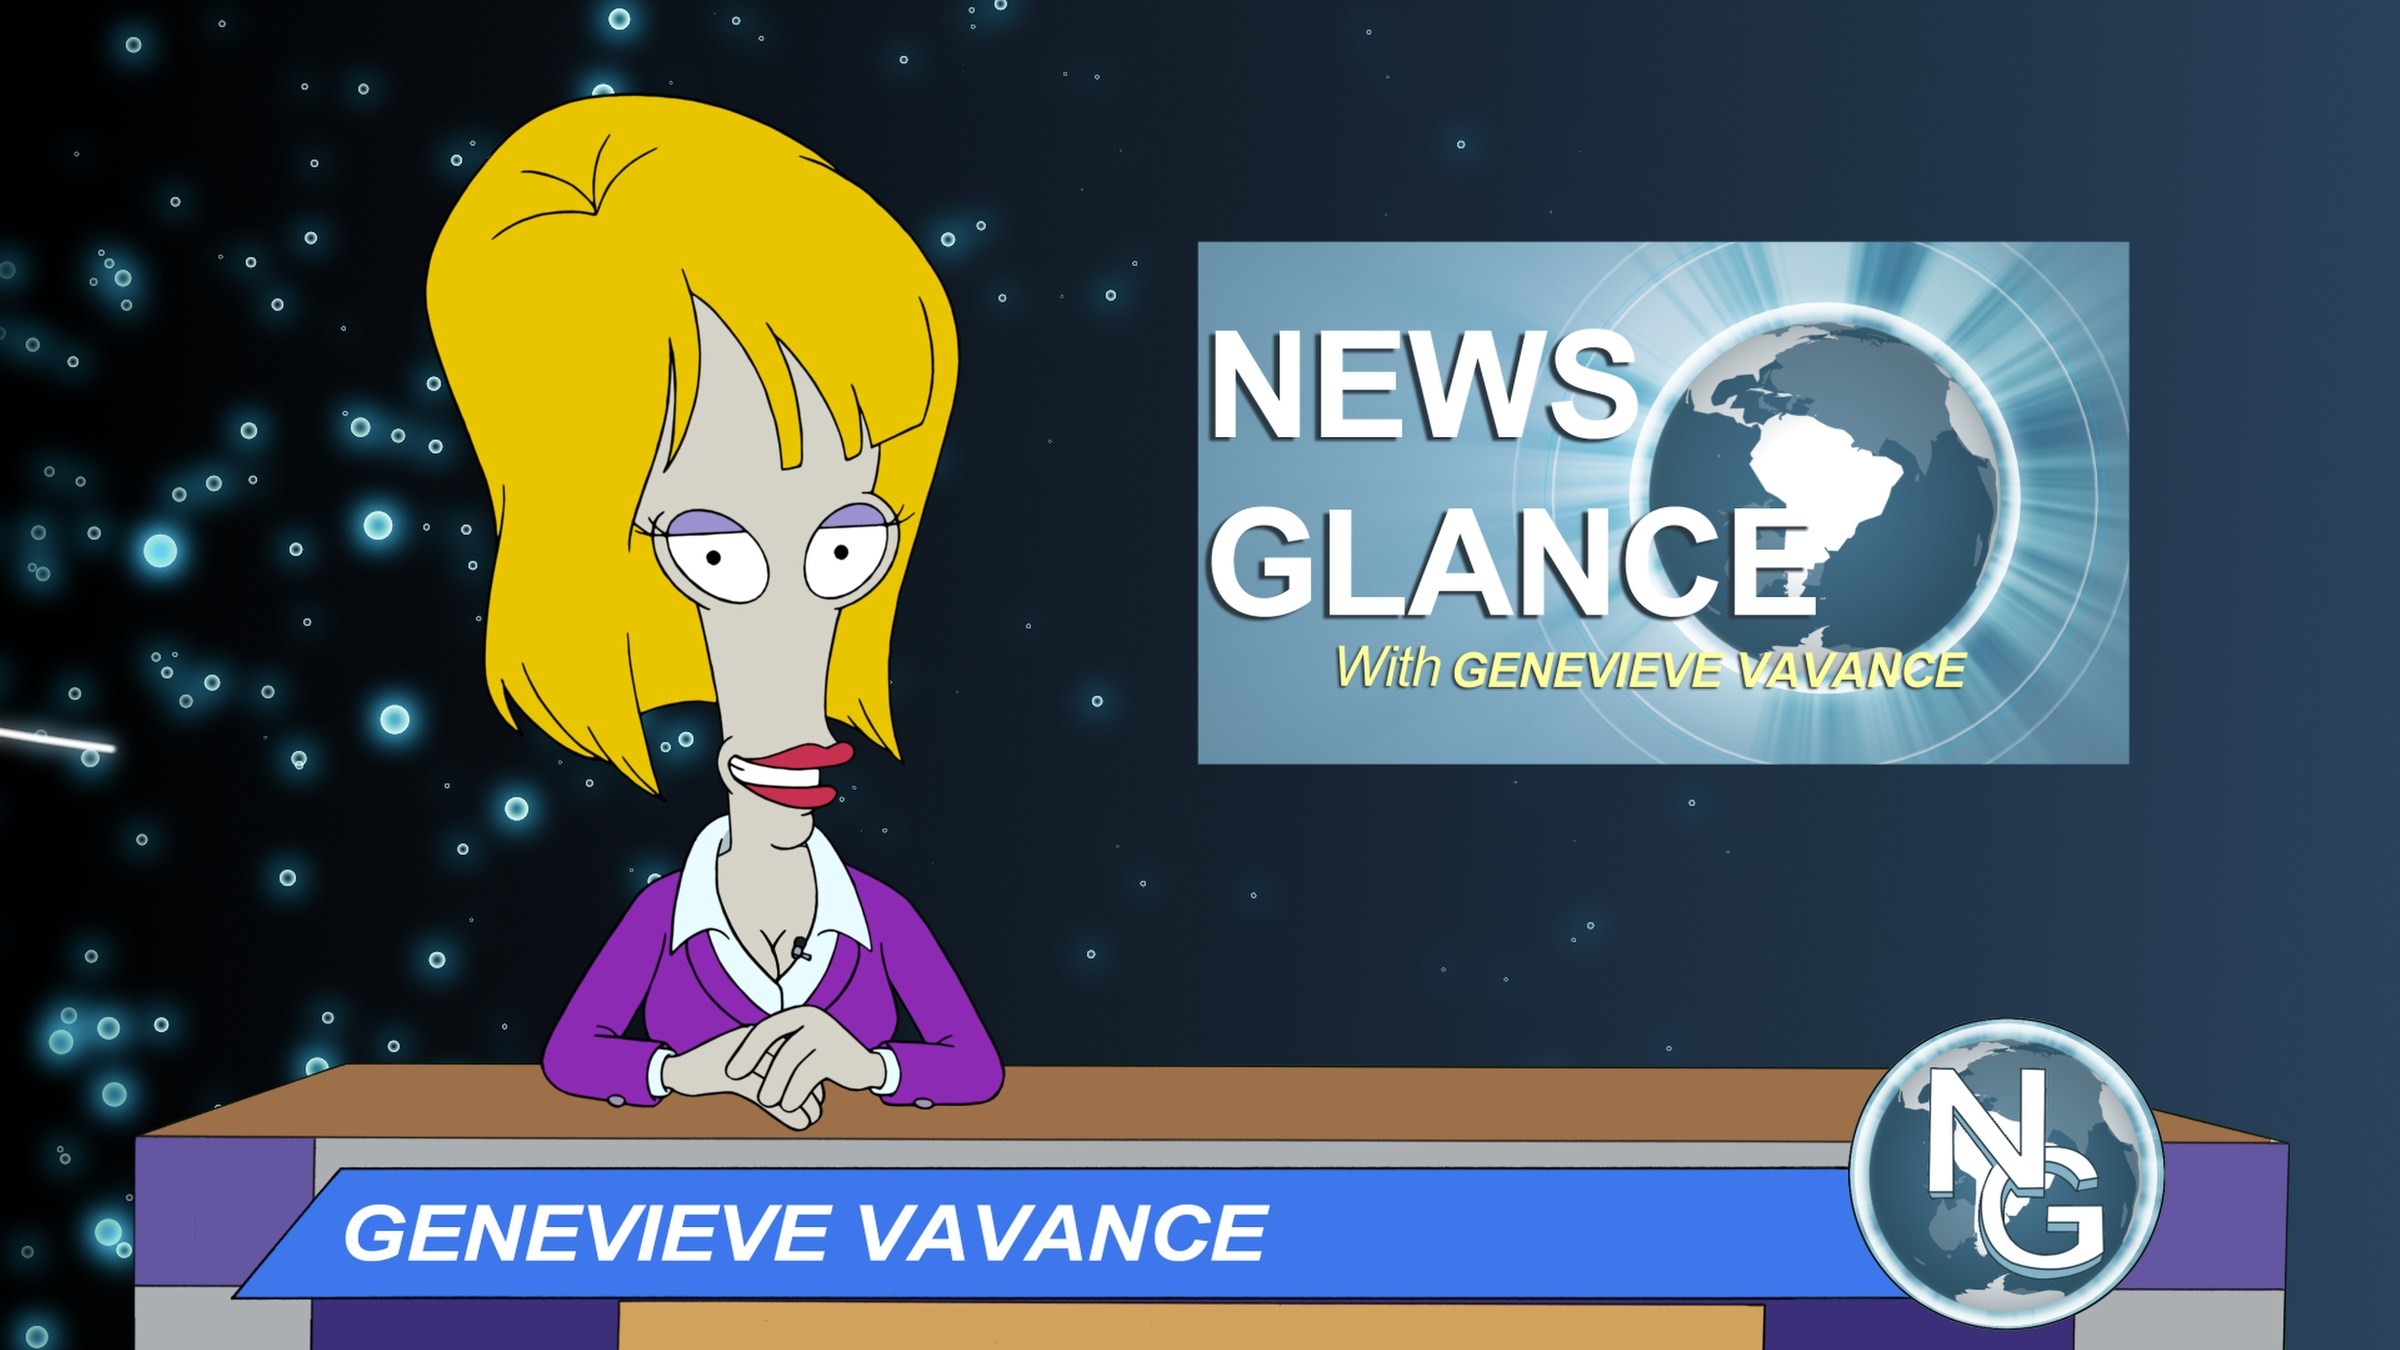 2400x1350 AMERICAN DAD: Genevieve Vavance reports a kidnapping story in the all-new  "News